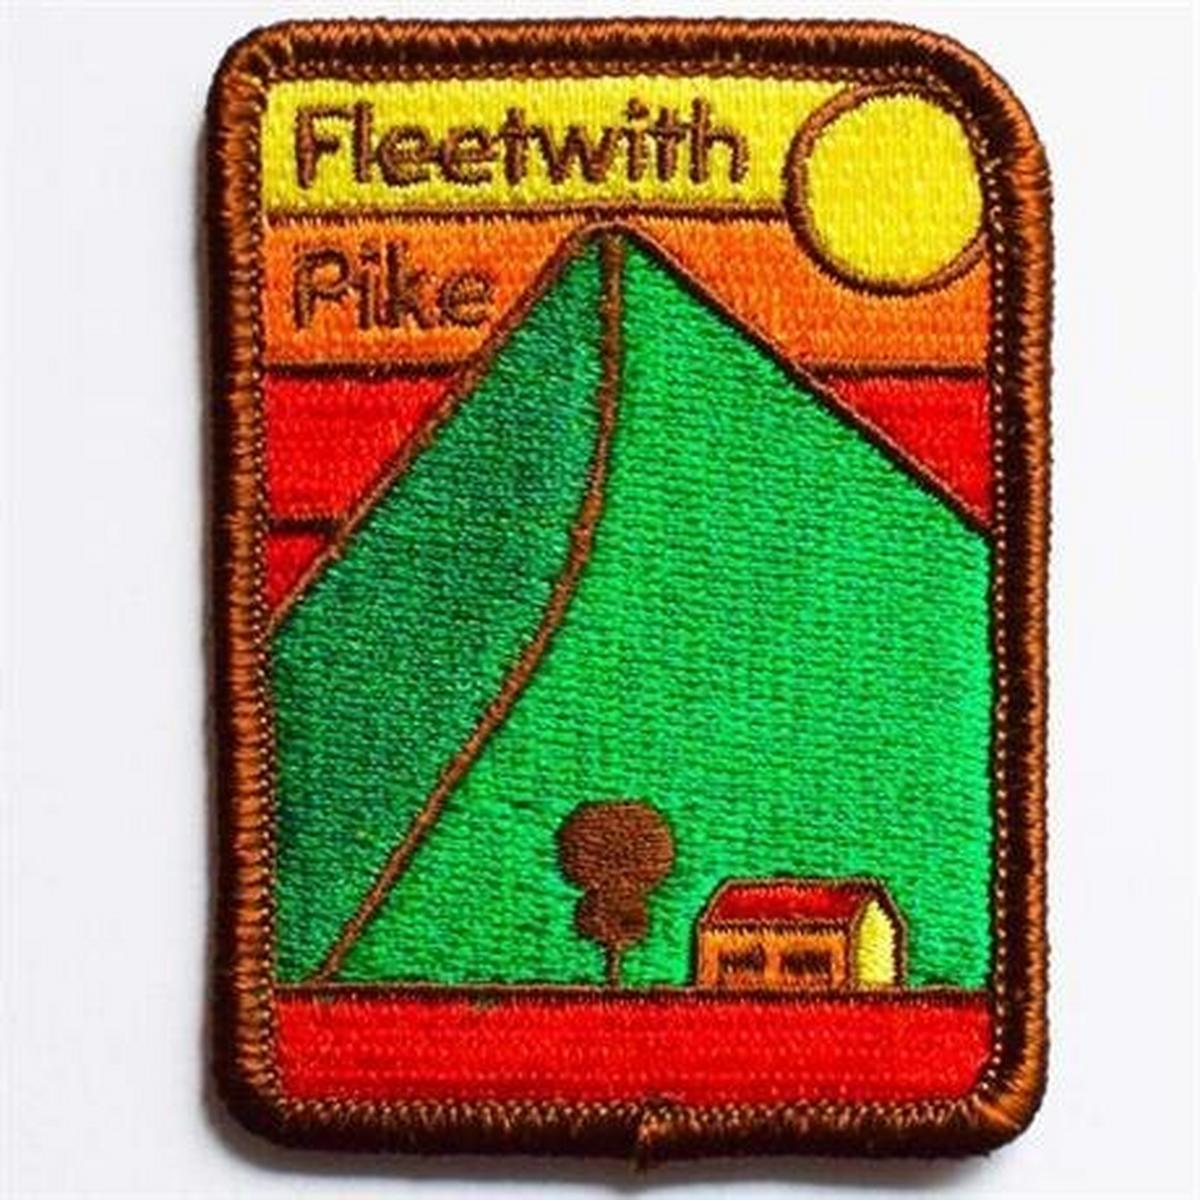 Conquer Lake District Patch - Fleetwith Pike